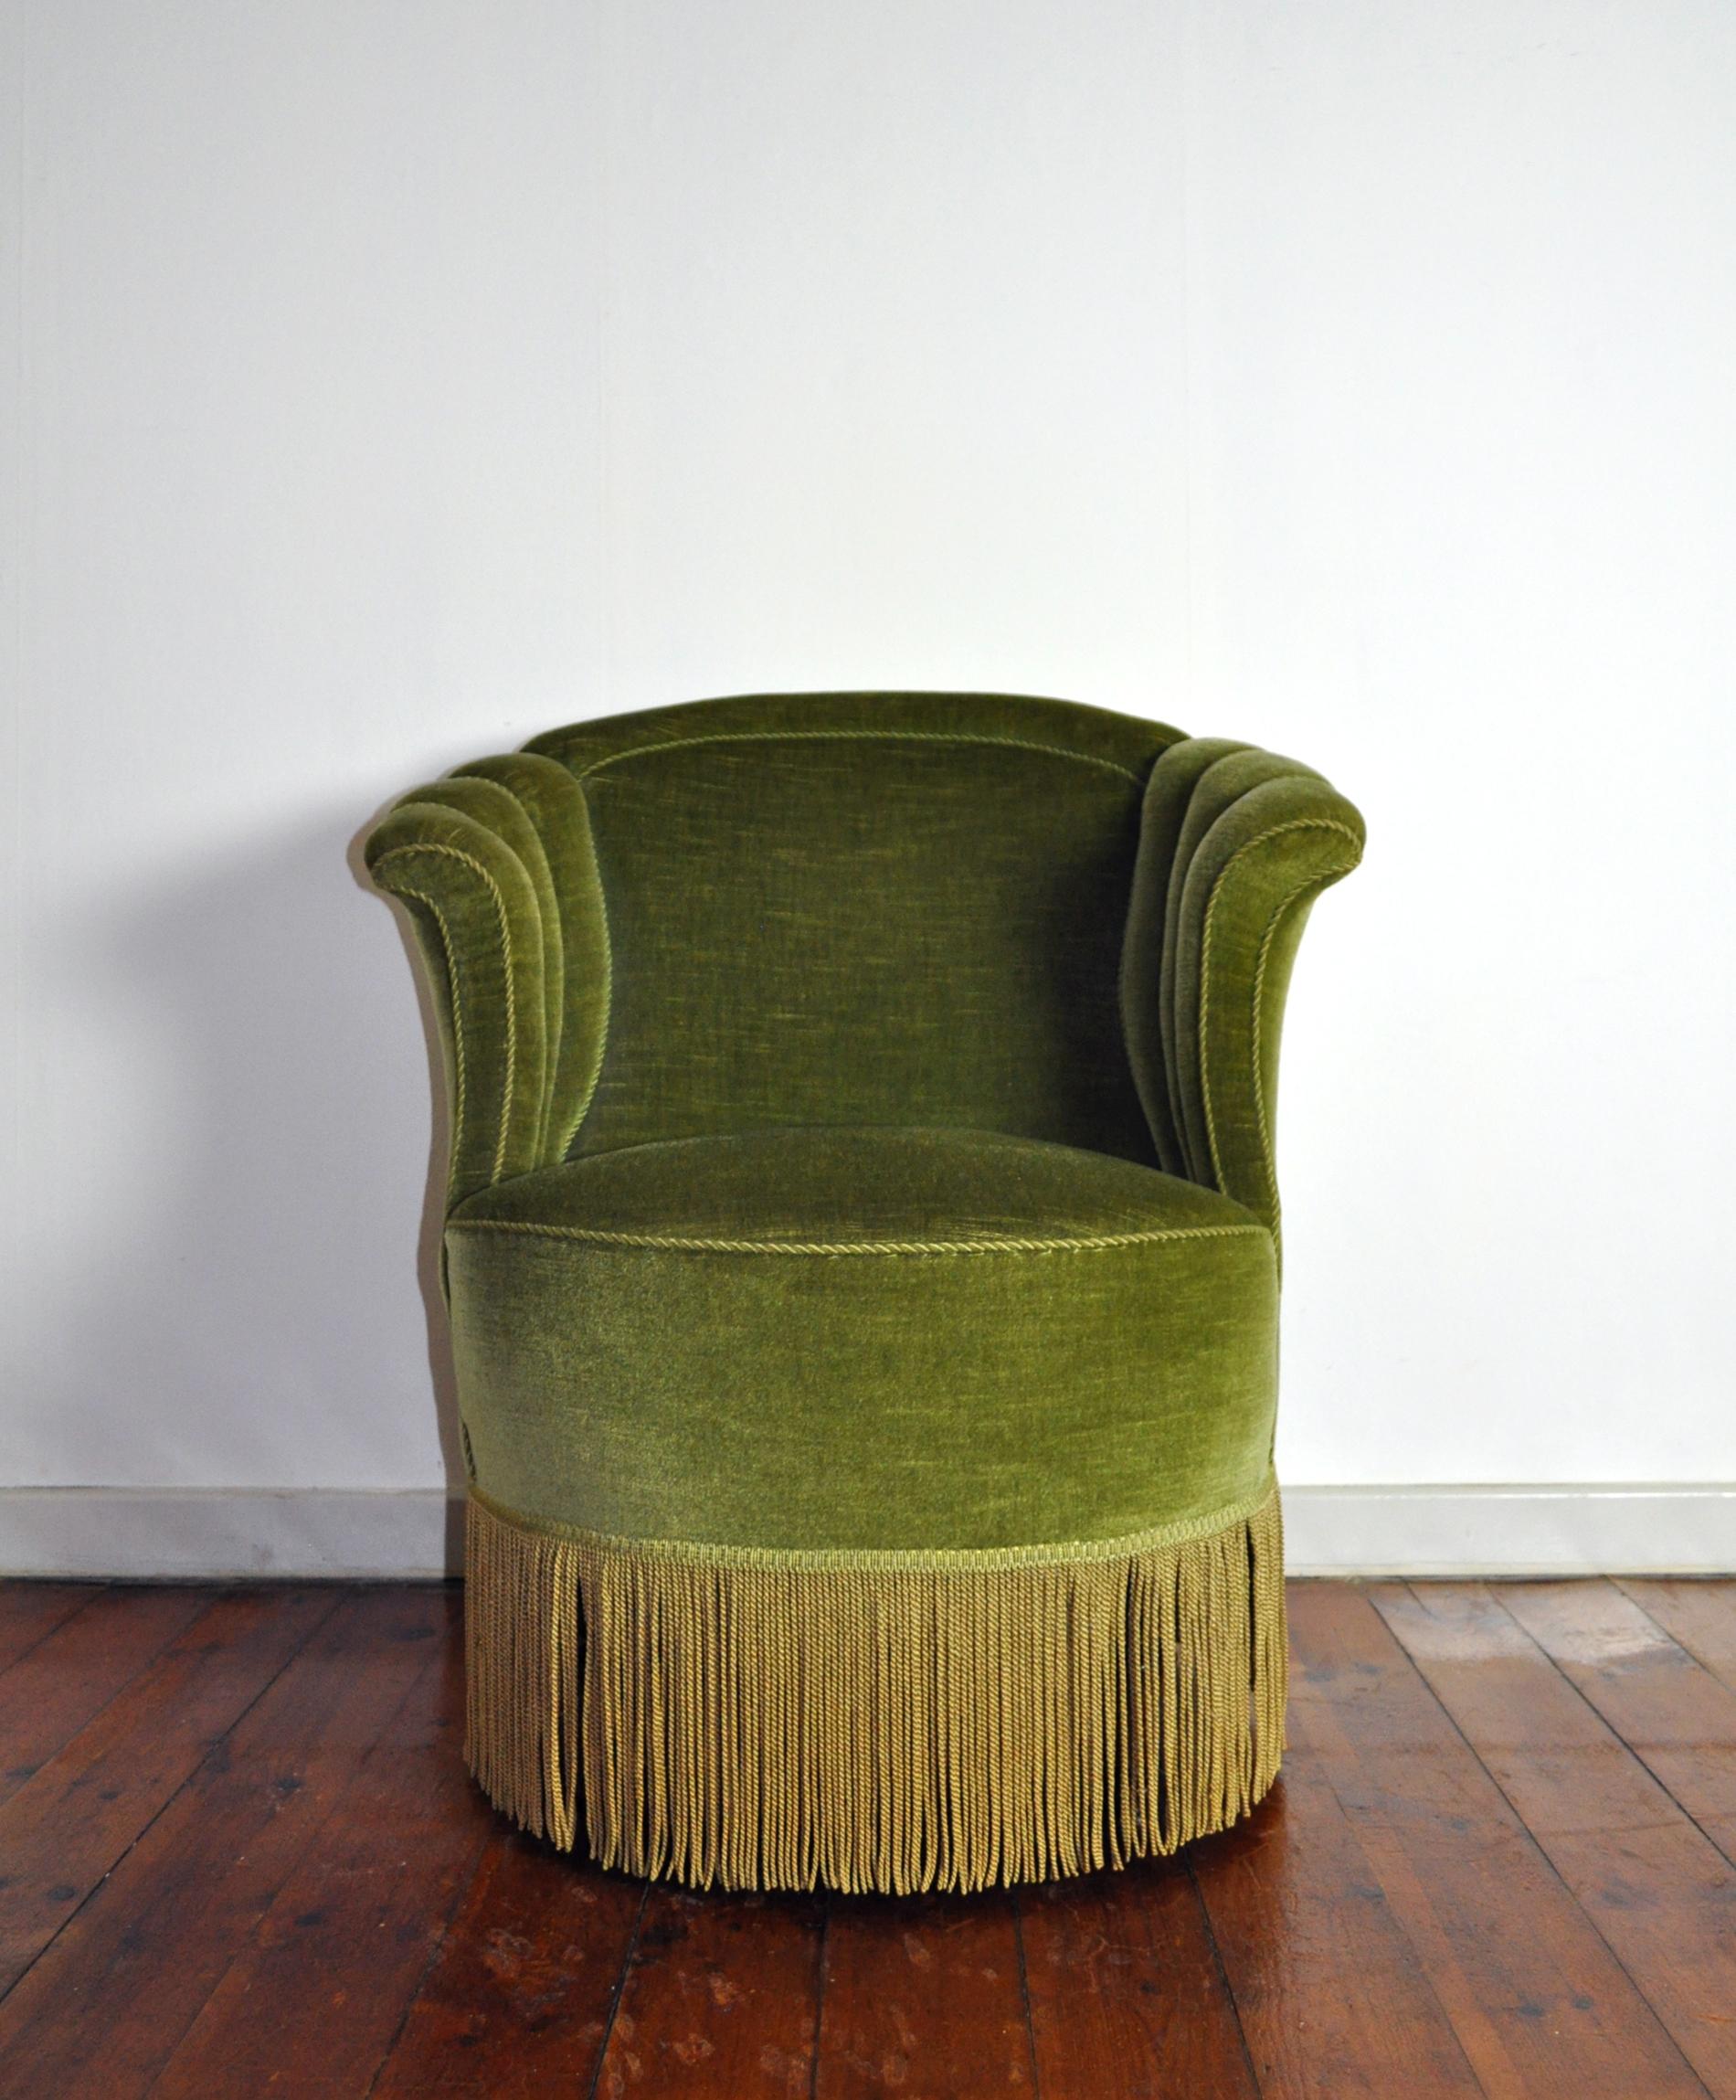 Voluptuous Art Deco chair executed with wooden legs, green velvet and fringes (can be removed). High lined and curved back and backrest.
It shows traits of traditional Victorian furniture yet also has a contemporary Art Deco touch.
Excellent